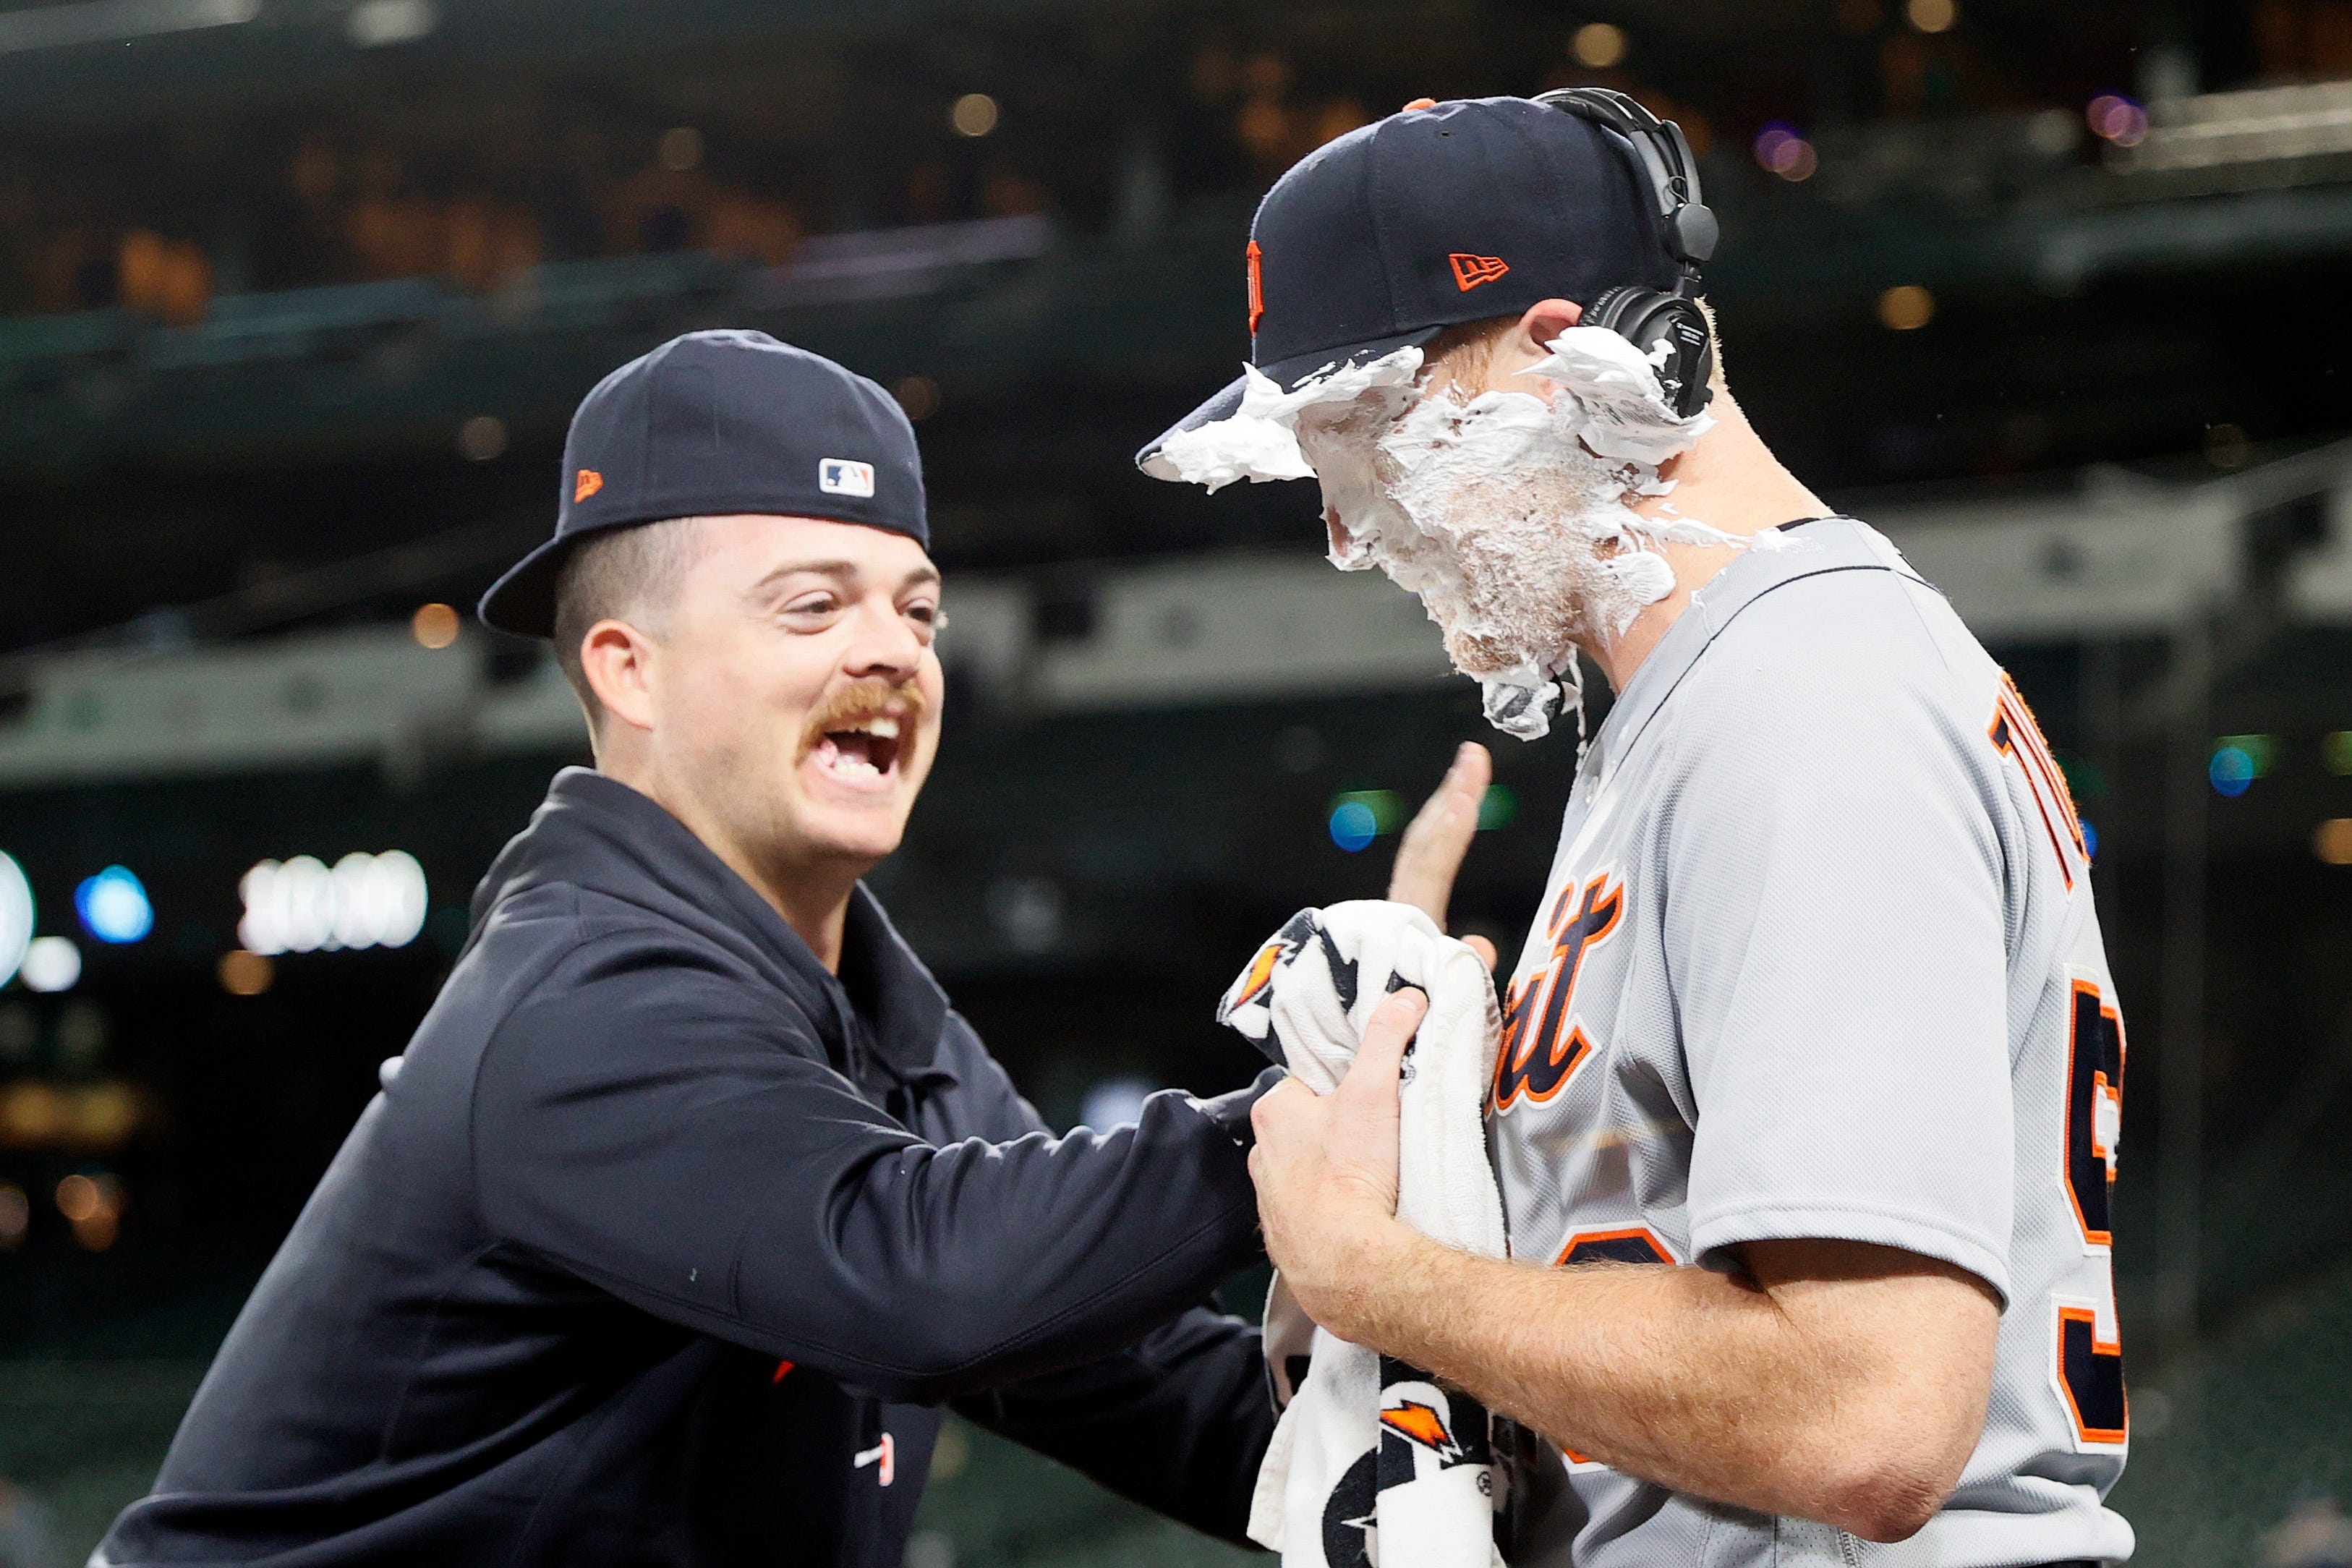 Catcher Jake Rogers of the Detroit Tigers congratulates Spencer Turnbull on his no-hitter against the Seattle Mariners at T-Mobile Park on May 18, 2021 in Seattle.